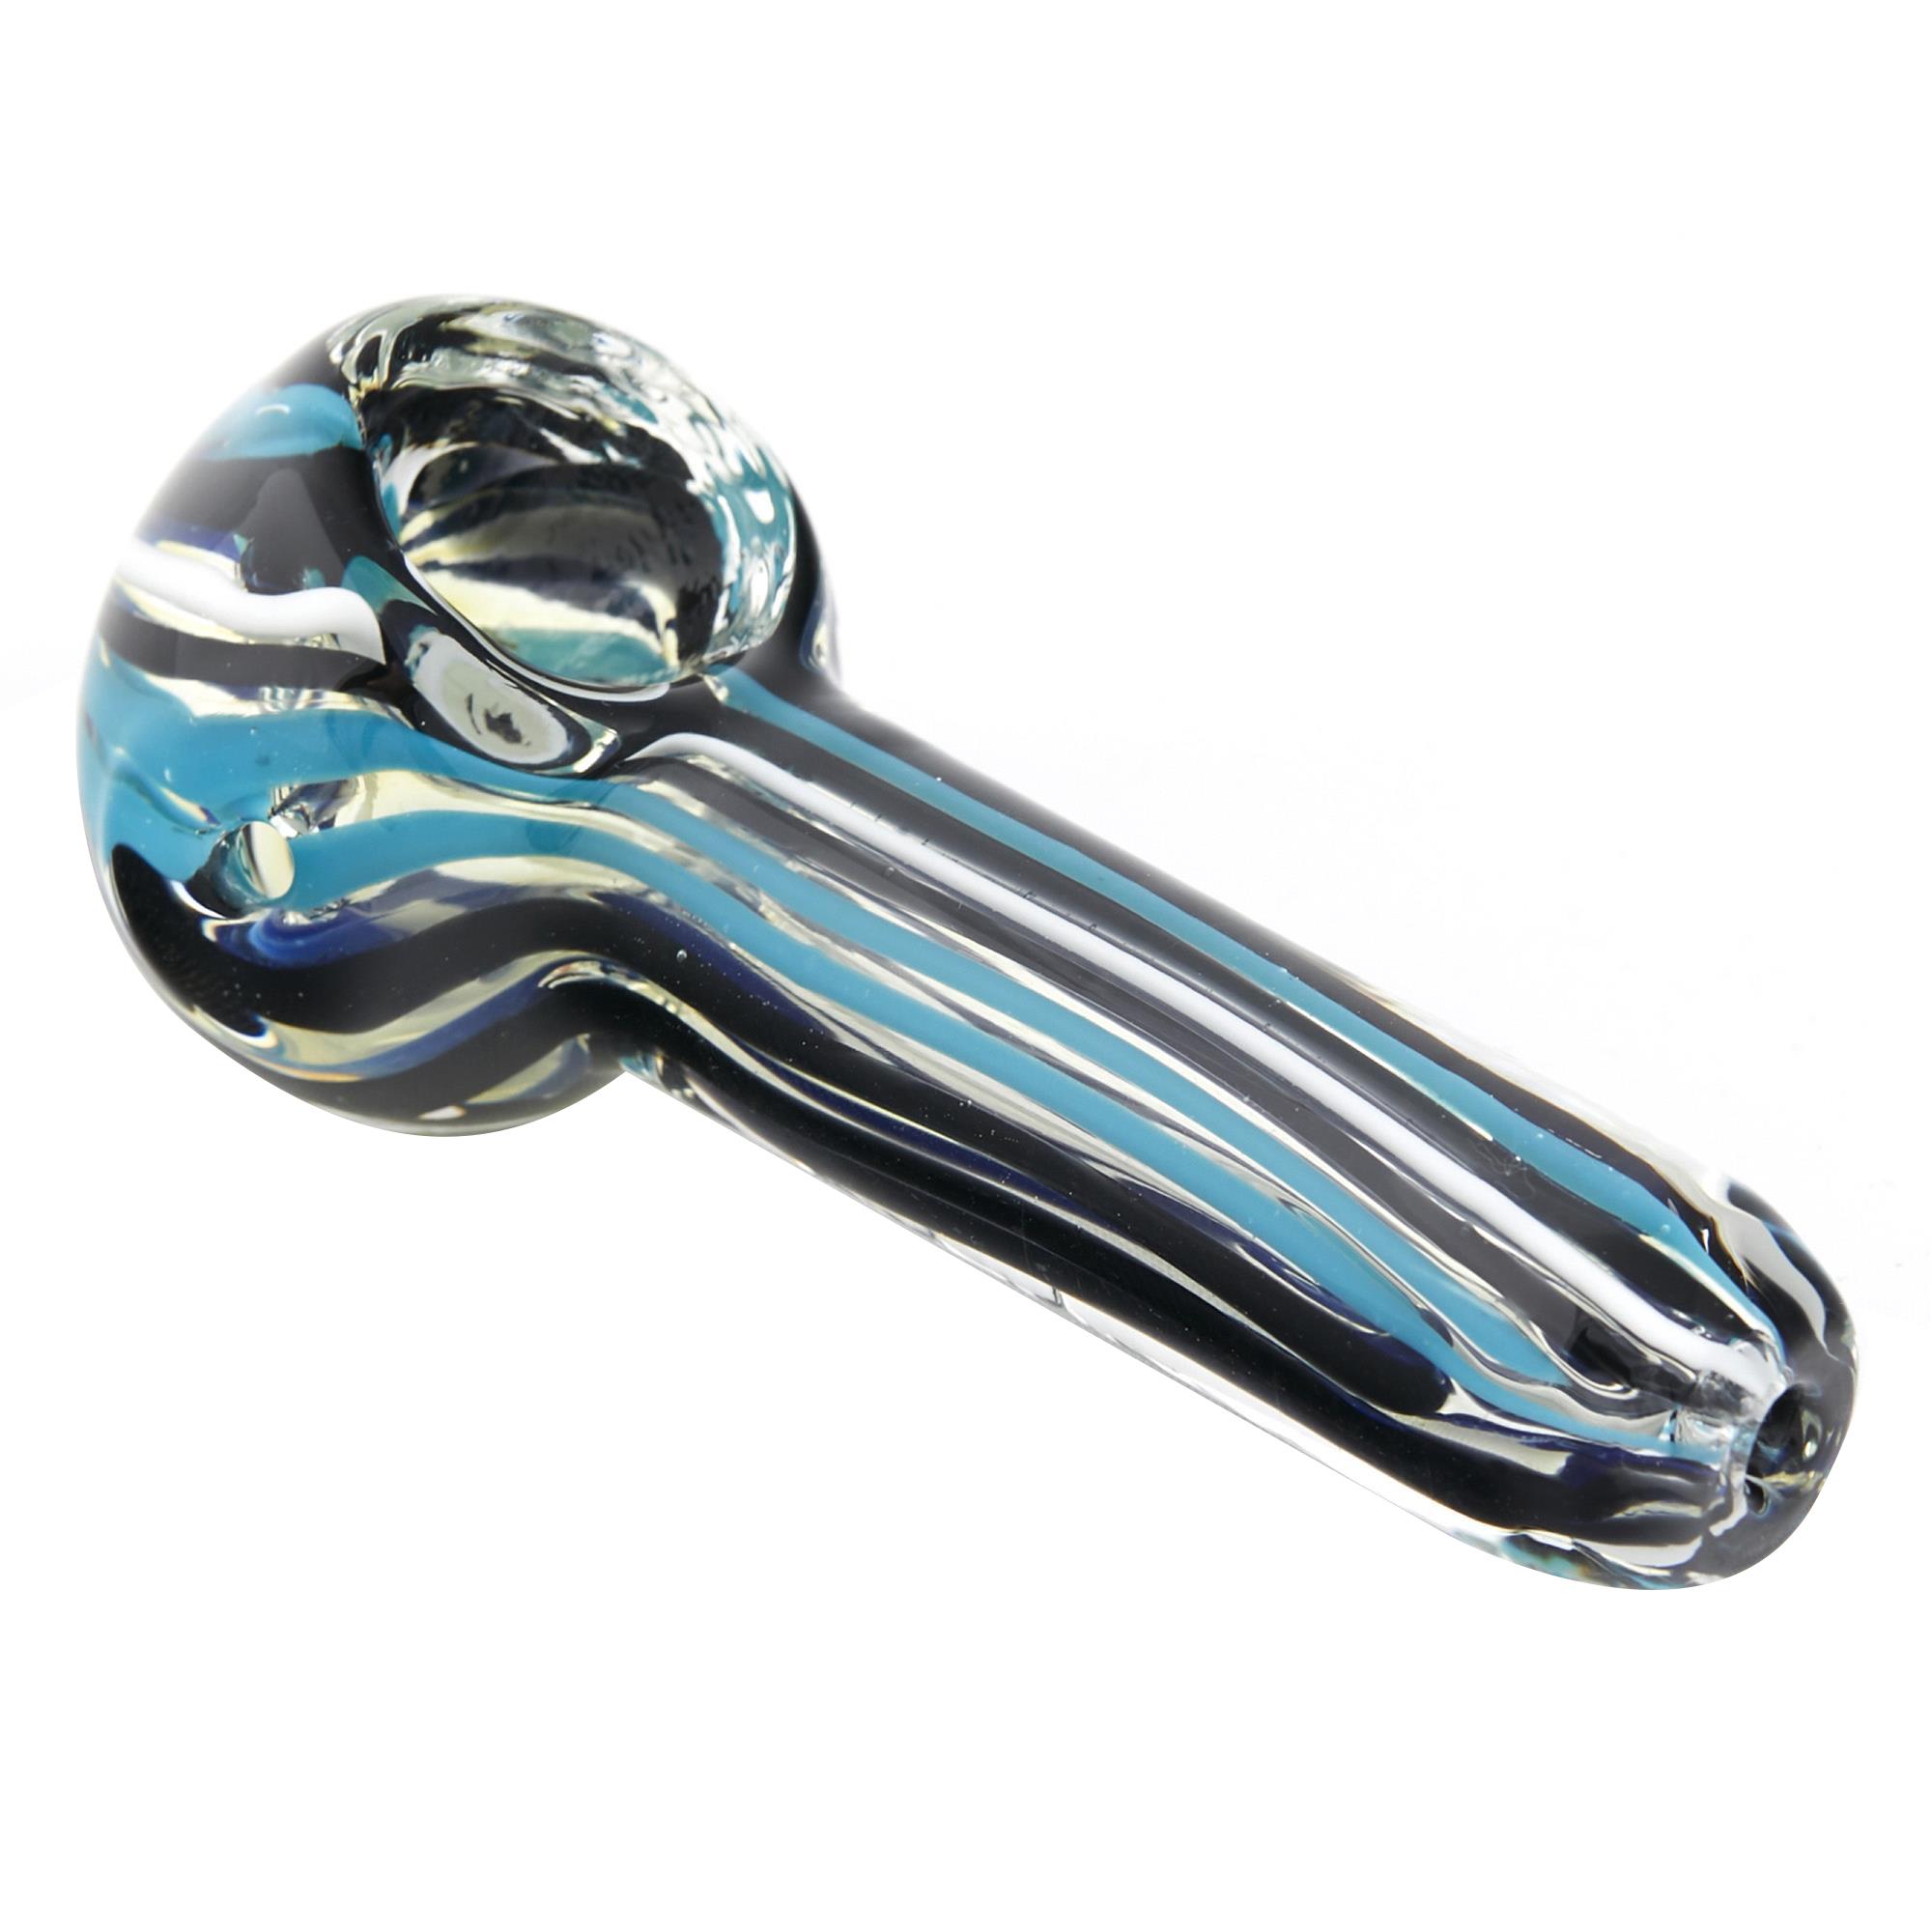 EXTREME HIGH SPOON PIPE